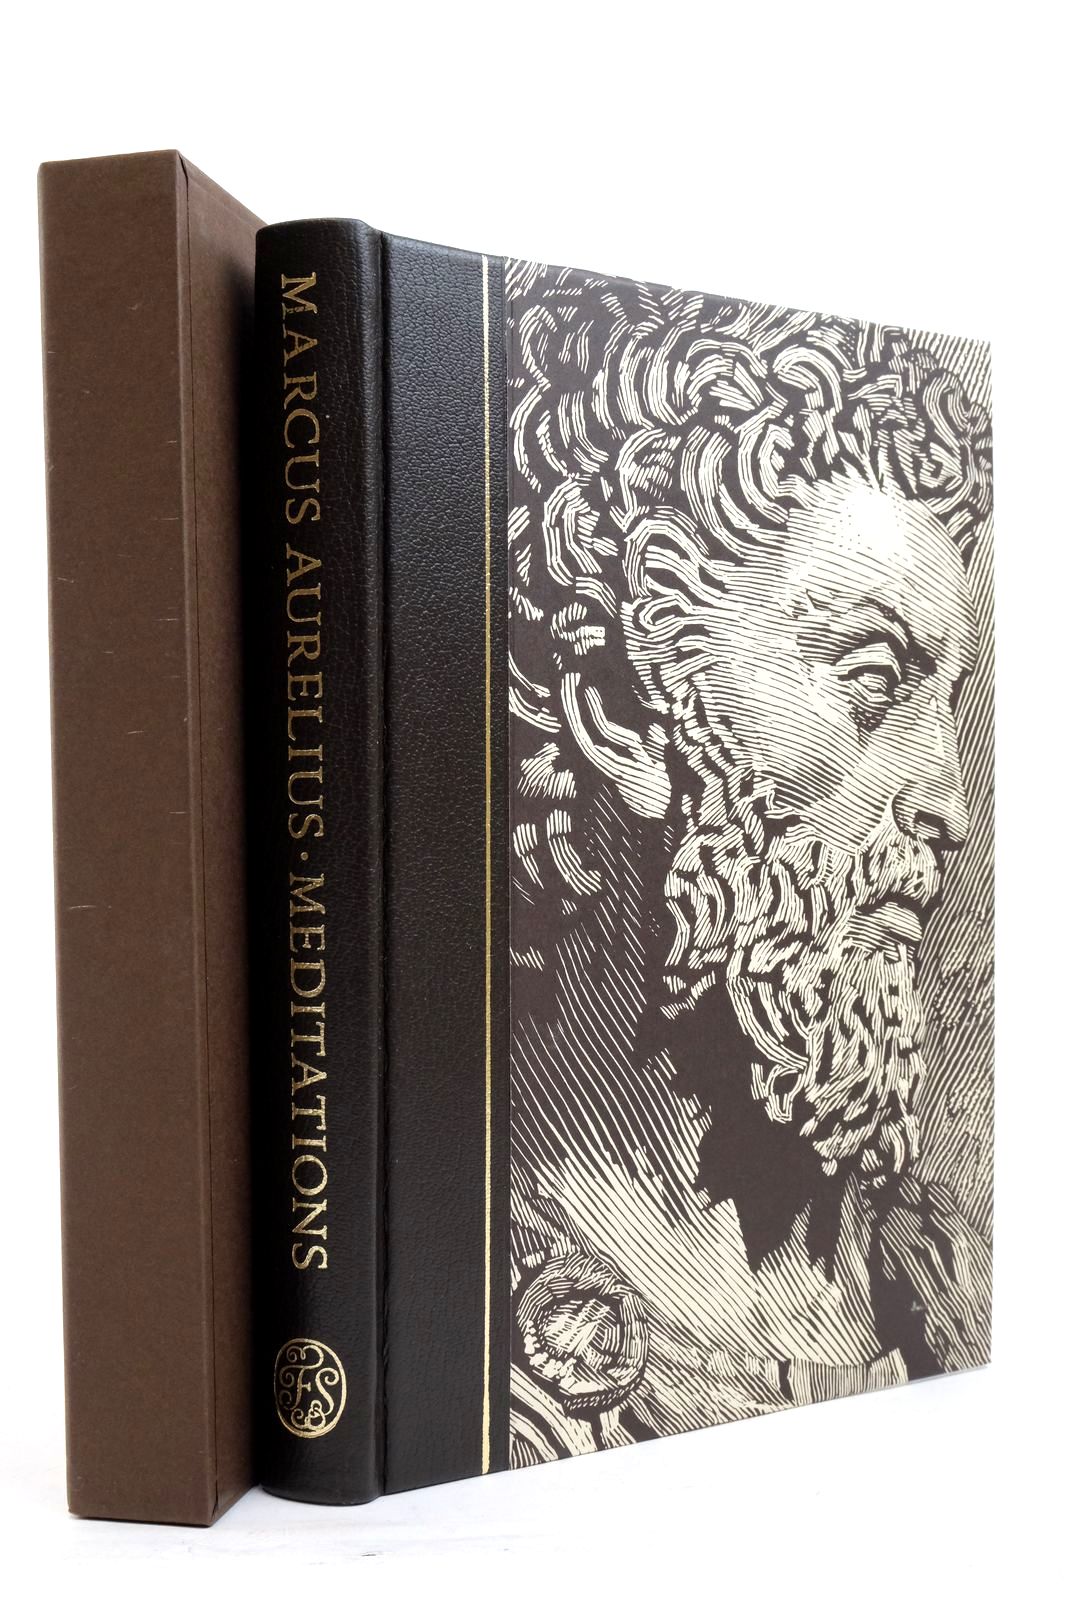 Photo of MEDITATIONS written by Aurelius, Marcus Staniforth, Maxwell illustrated by Brett, Simon published by Folio Society (STOCK CODE: 2138224)  for sale by Stella & Rose's Books